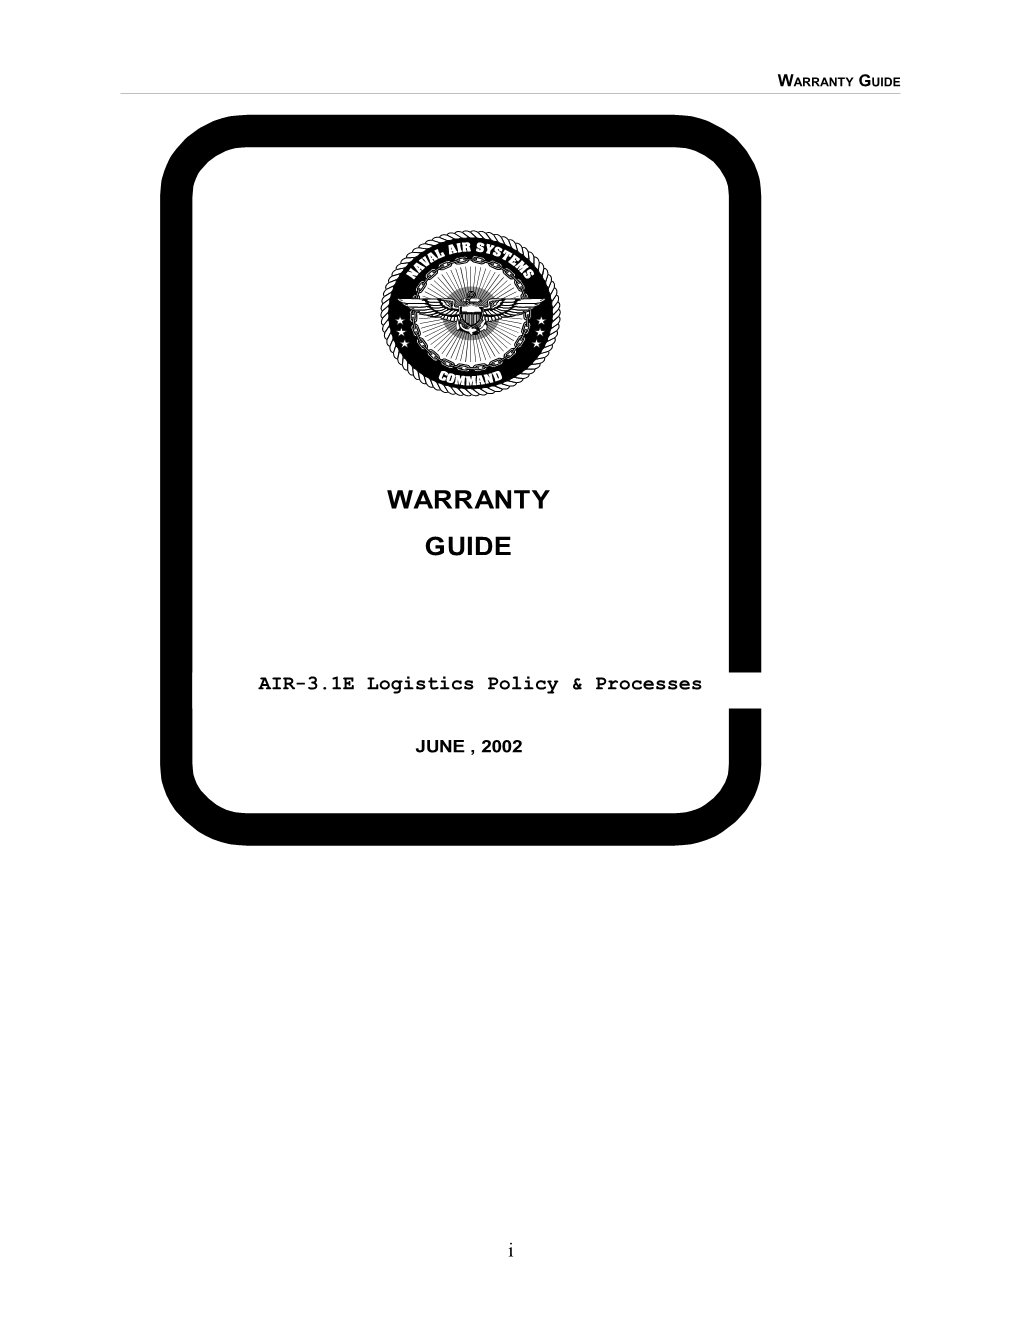 1.4 Criteria for Use of Warranties 3